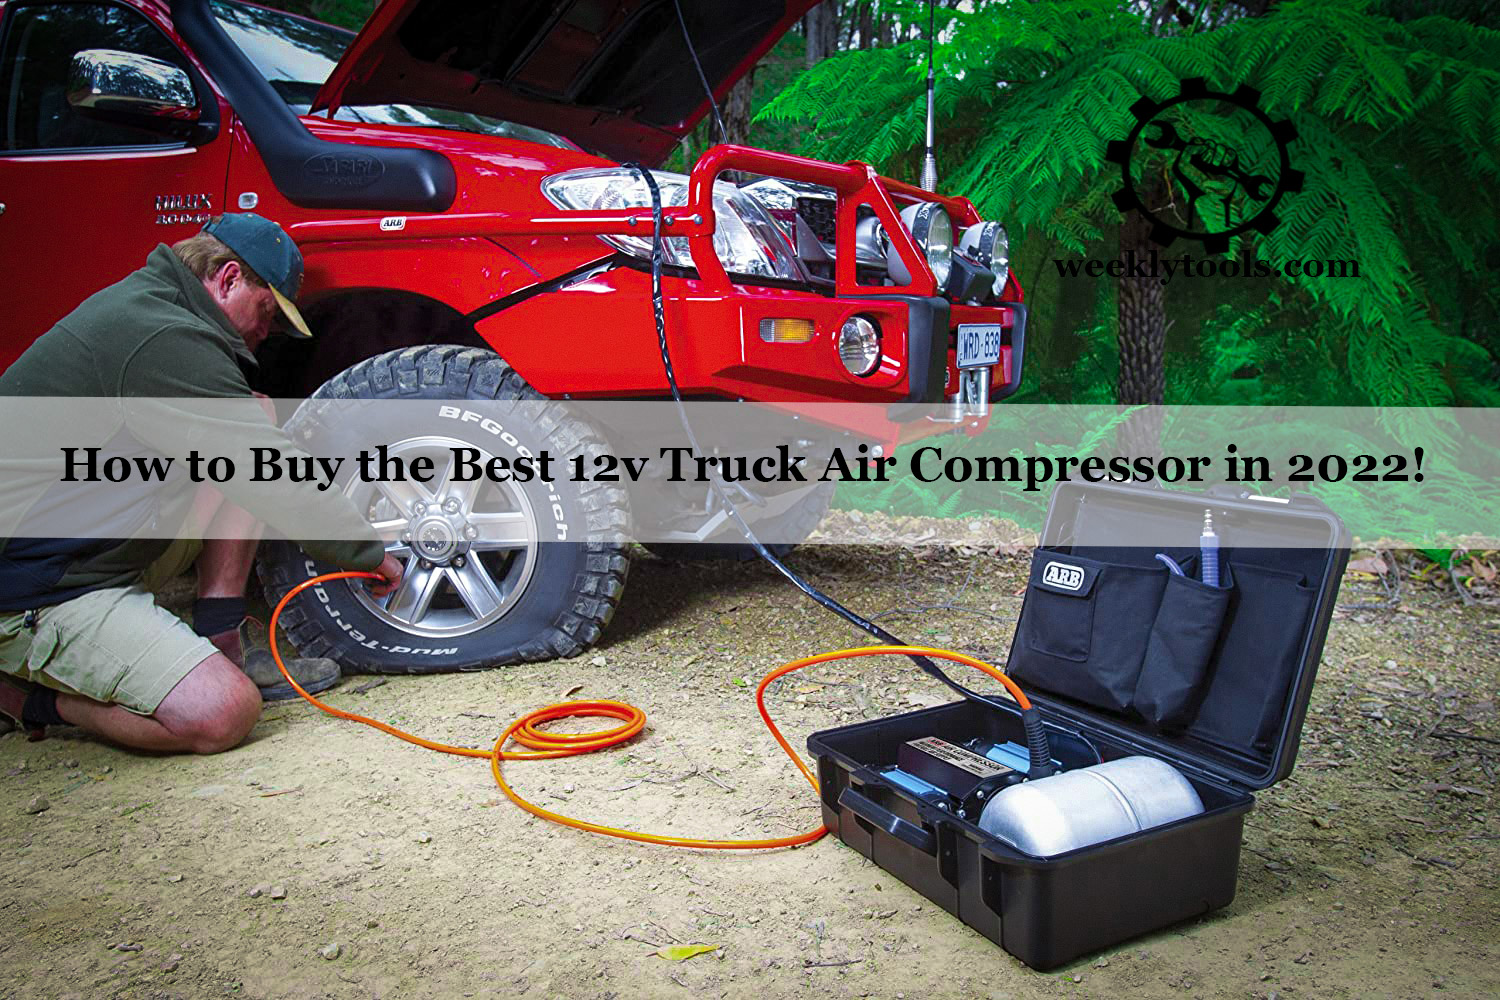 How to Buy the Best 12v Truck Air Compressor in 2022!